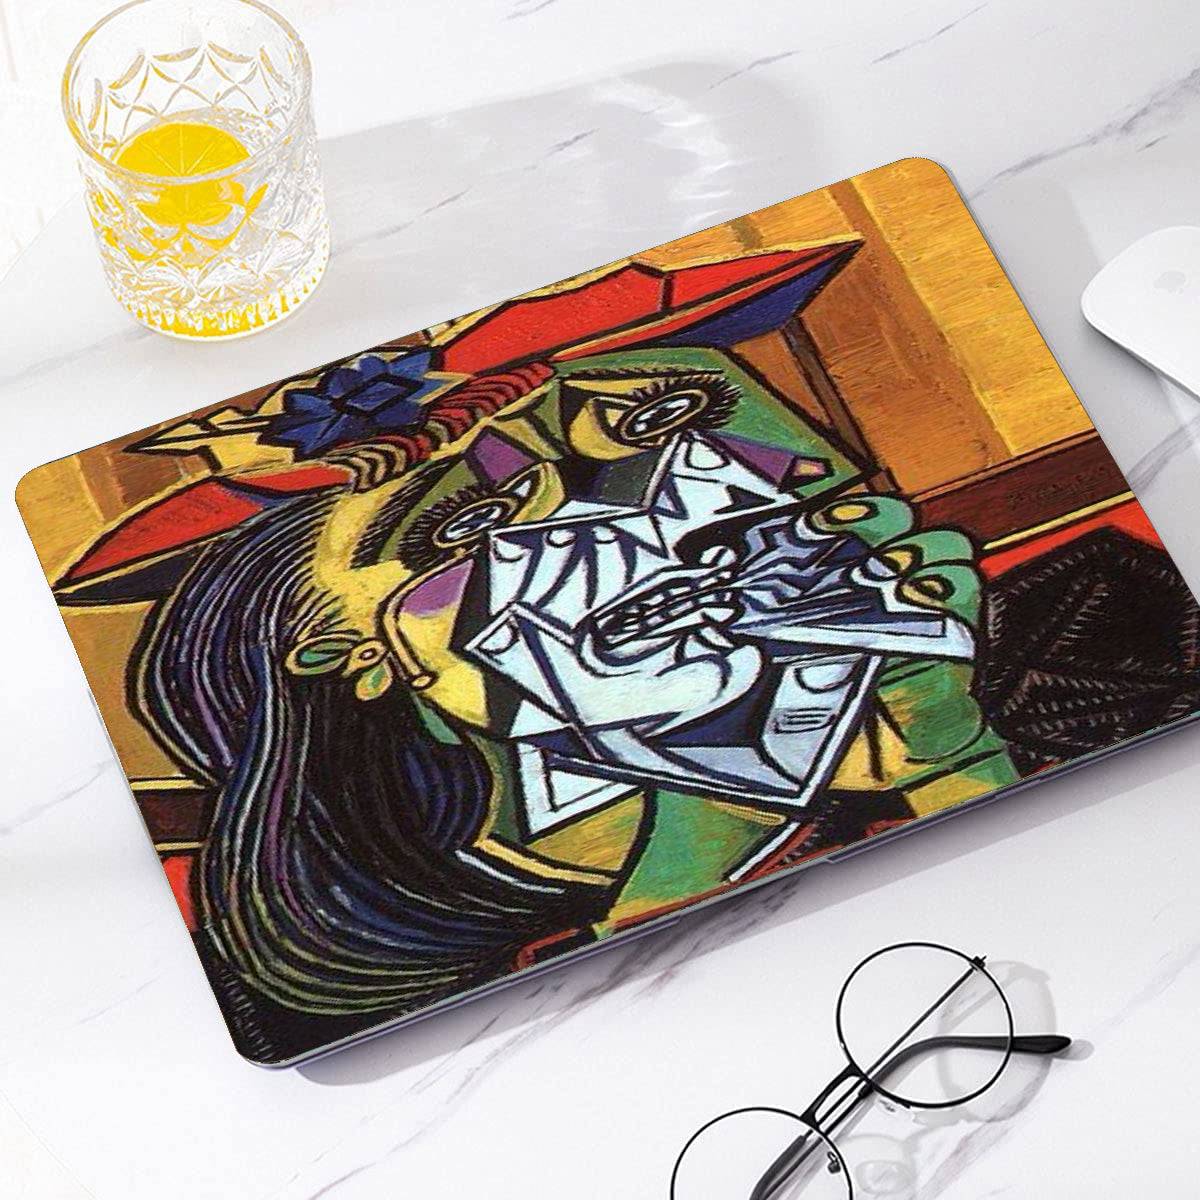 Picasso Works''Crying Woman''Macbook case Logo shines through - BELKCASE